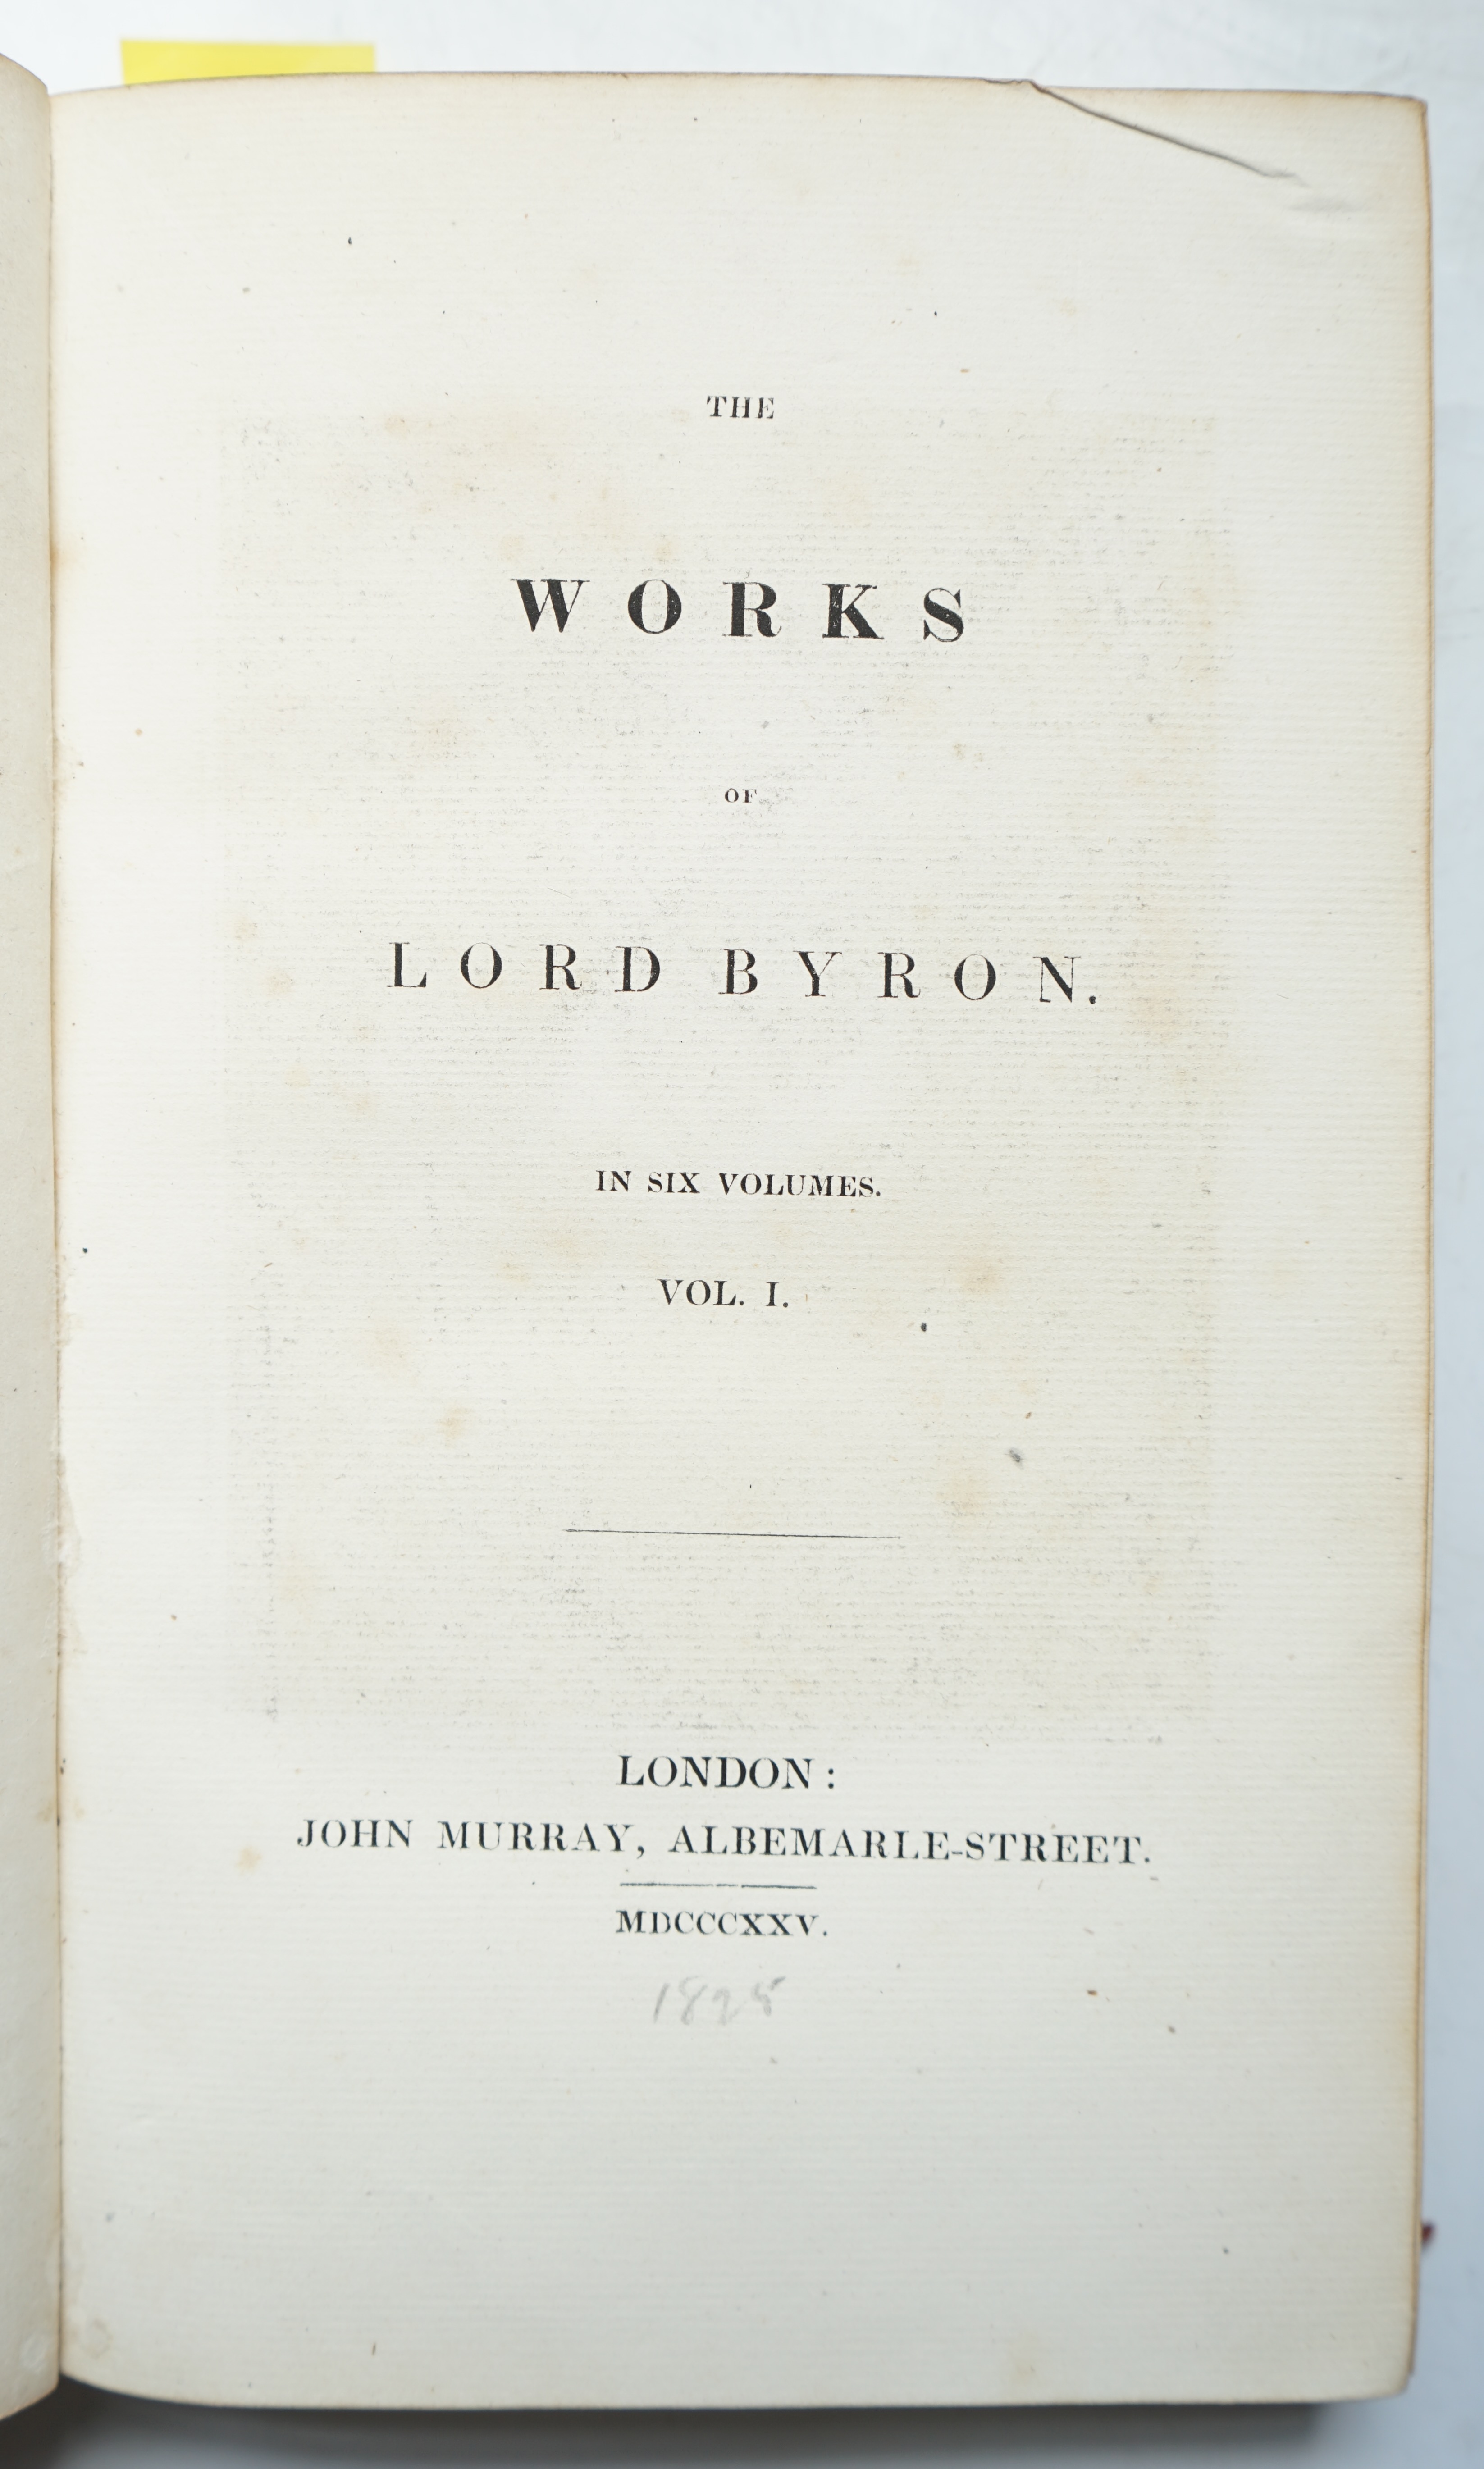 Byron, George Gordon Noel, Lord - The Works of Lord Byron, 6 vols, 8vo, red morocco, with portrait frontis to vol 1, John Murray, 1825 and, vols 7 & 8 uniformly bound, from an 8 volume set, John Murray, 1824, (8).